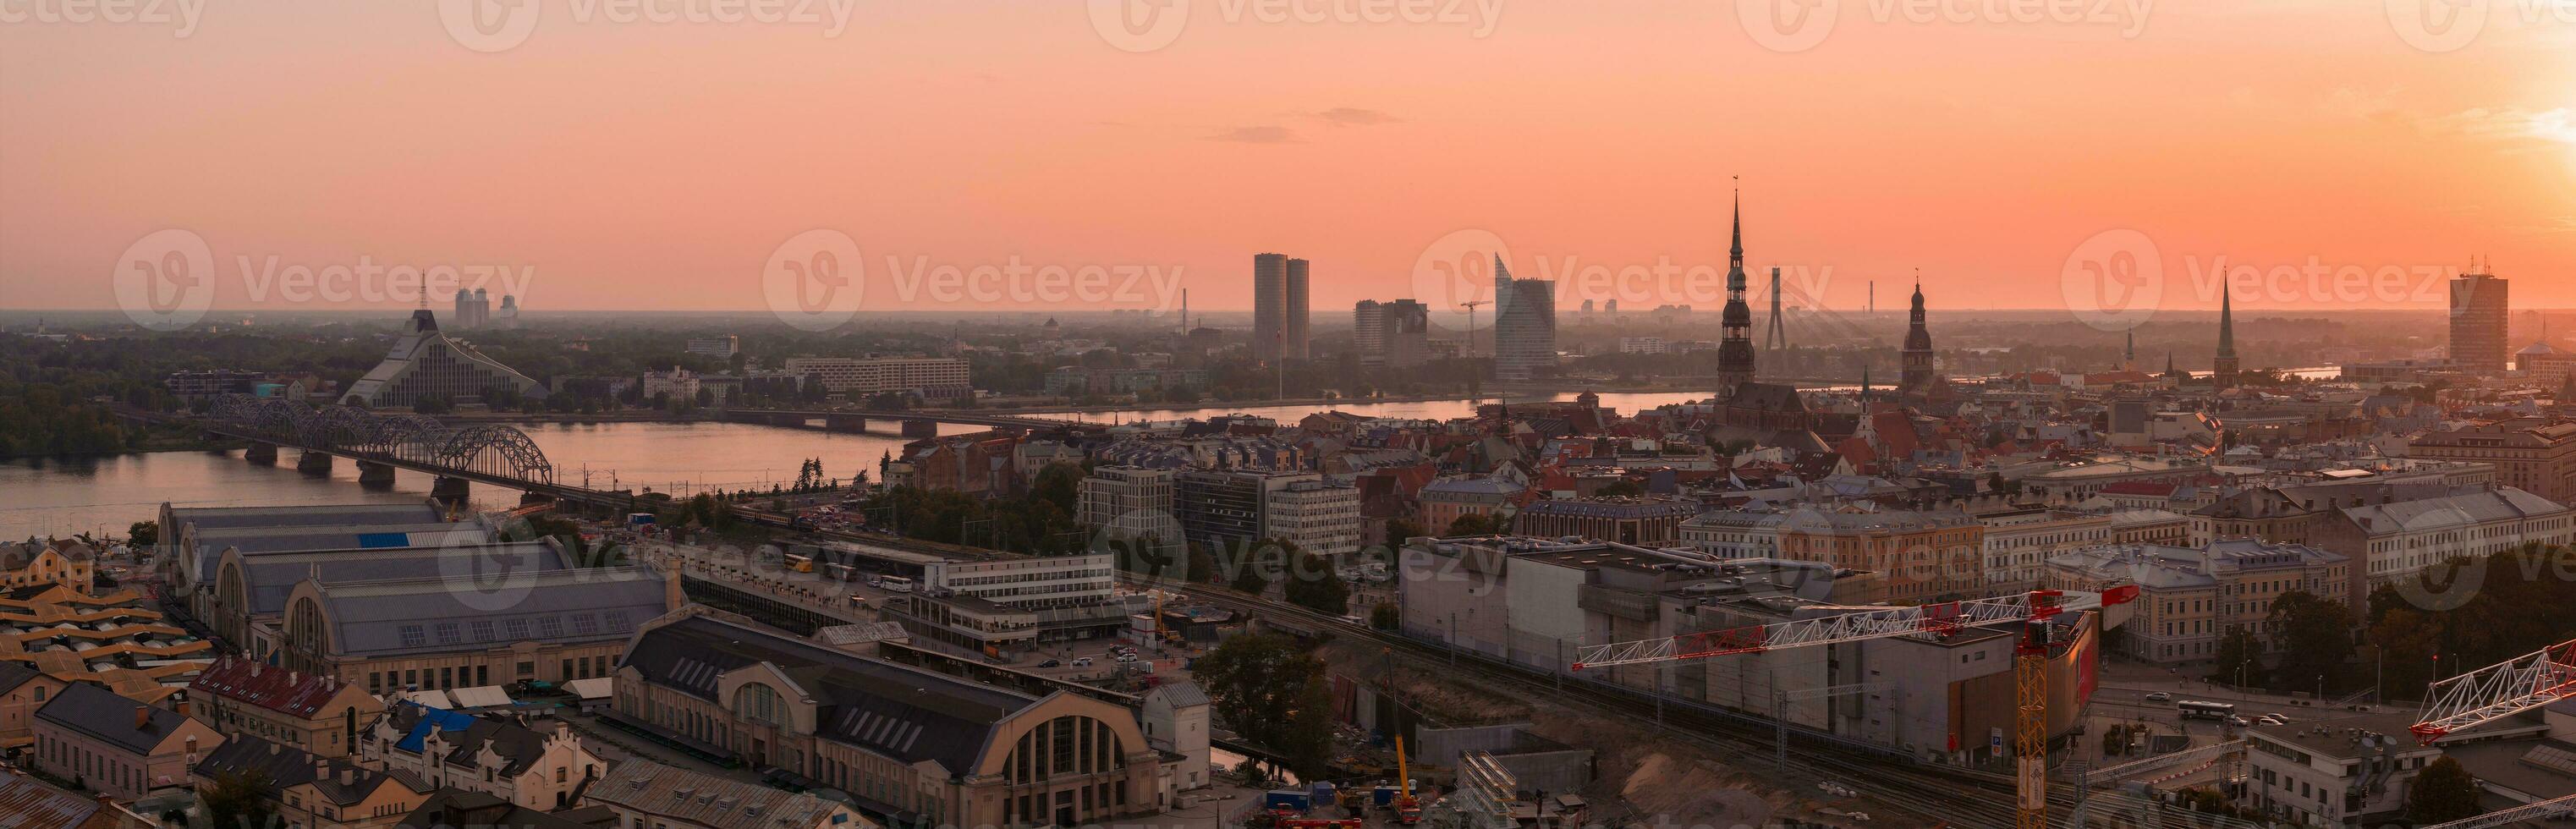 Summer sunset in Riga, Latvia. Aerial view of Riga, the capital of Latvia at sunset. photo